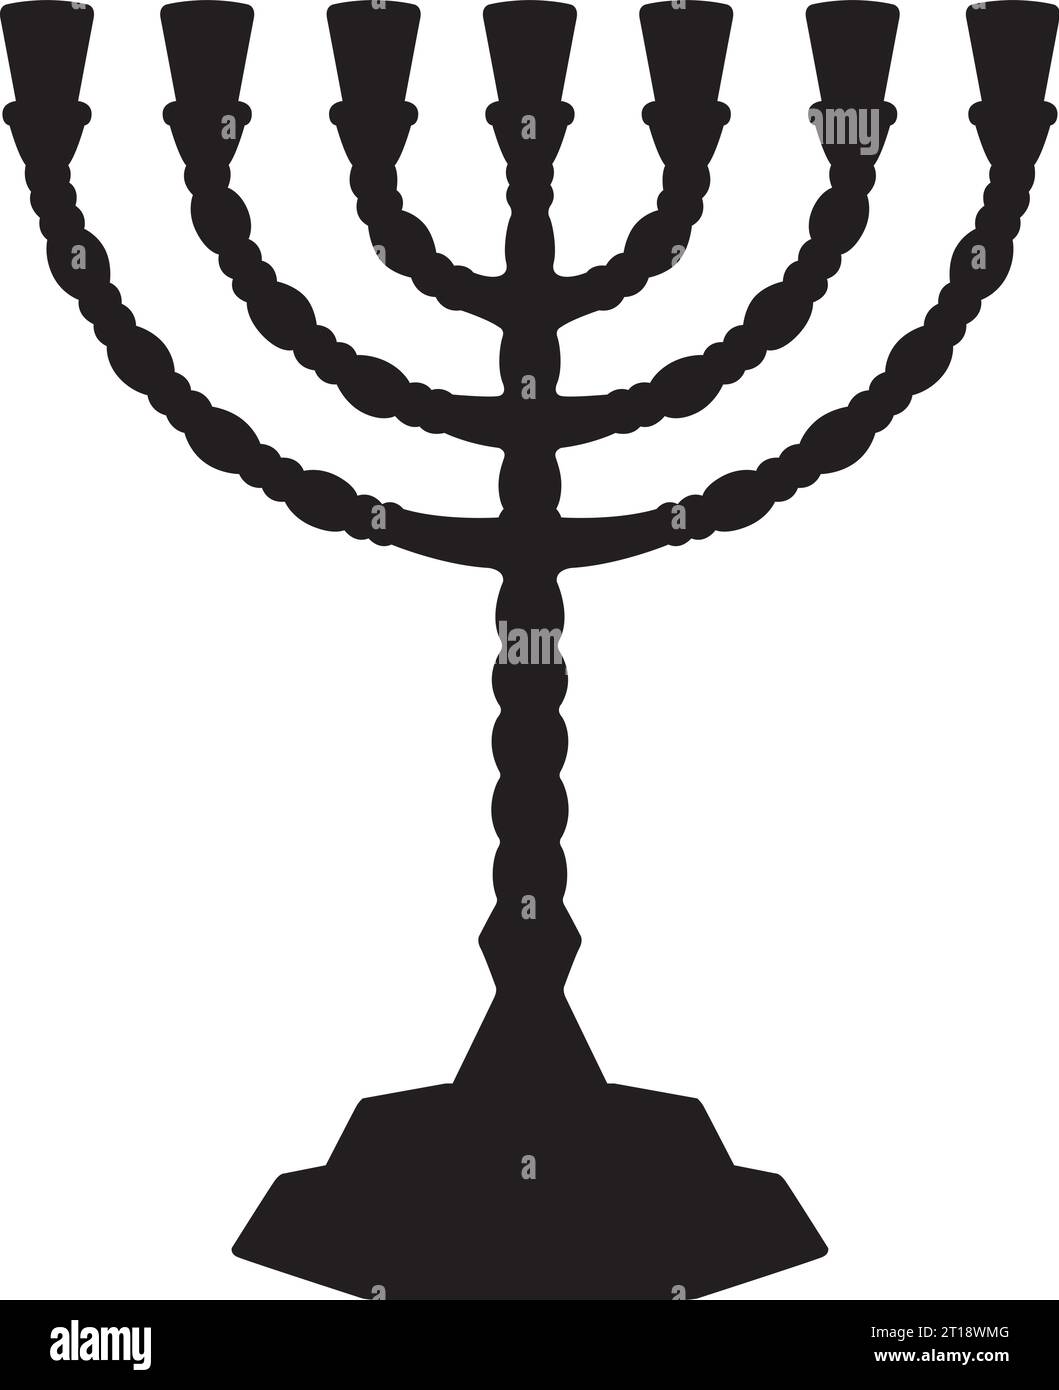 Menorah symbol of israel, cut out vector illustration, silhouette on white background Stock Vector